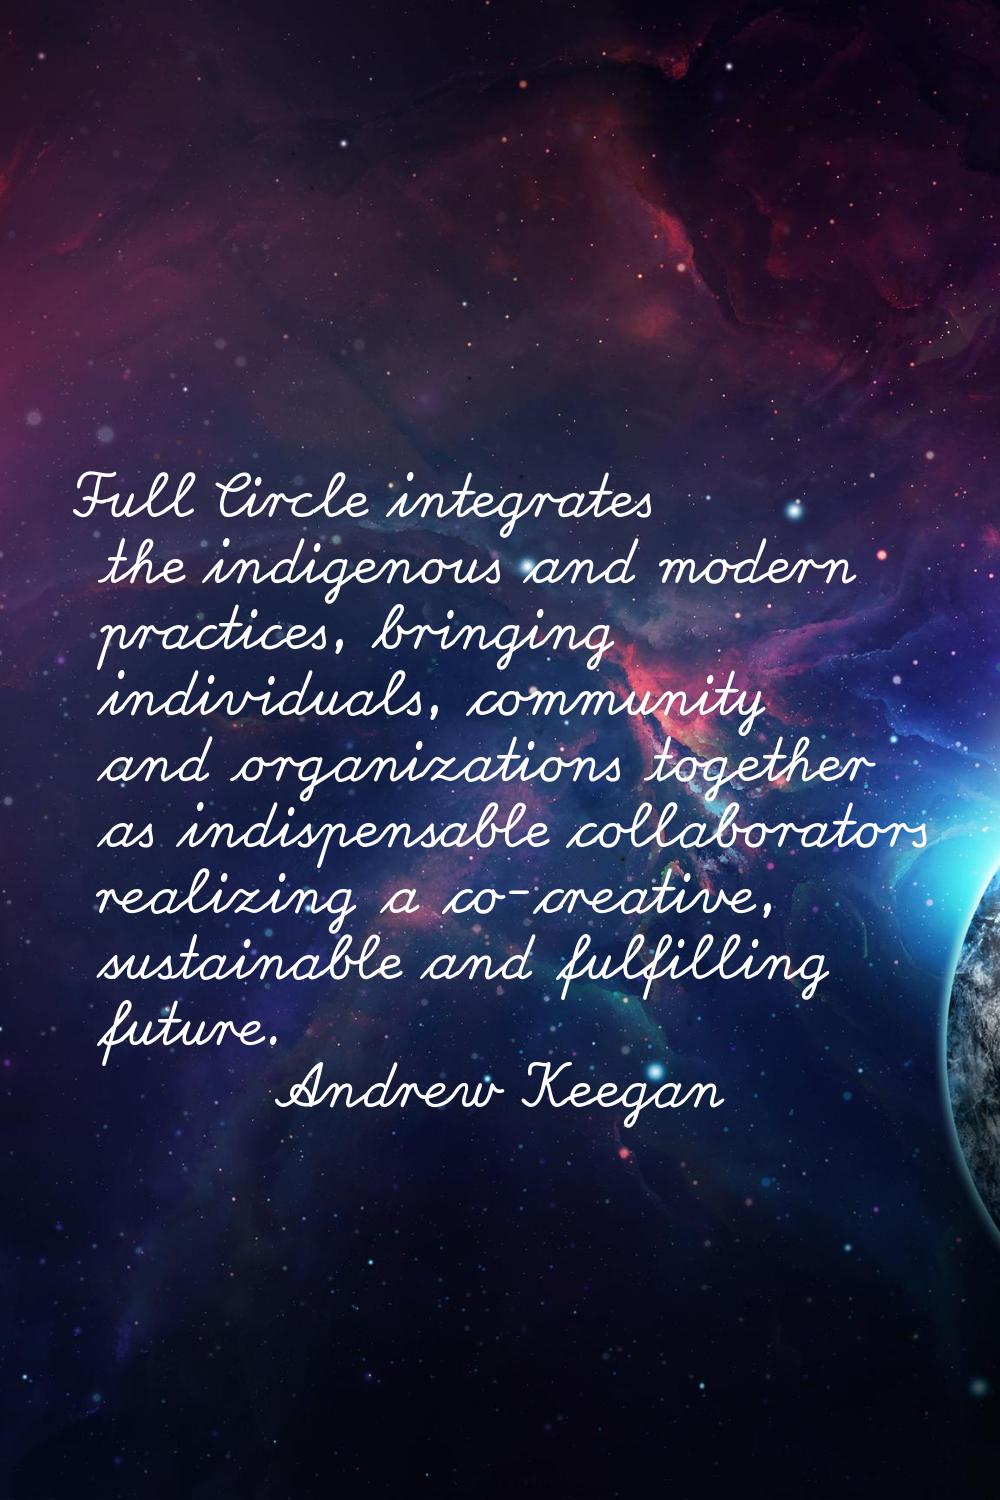 Full Circle integrates the indigenous and modern practices, bringing individuals, community and org